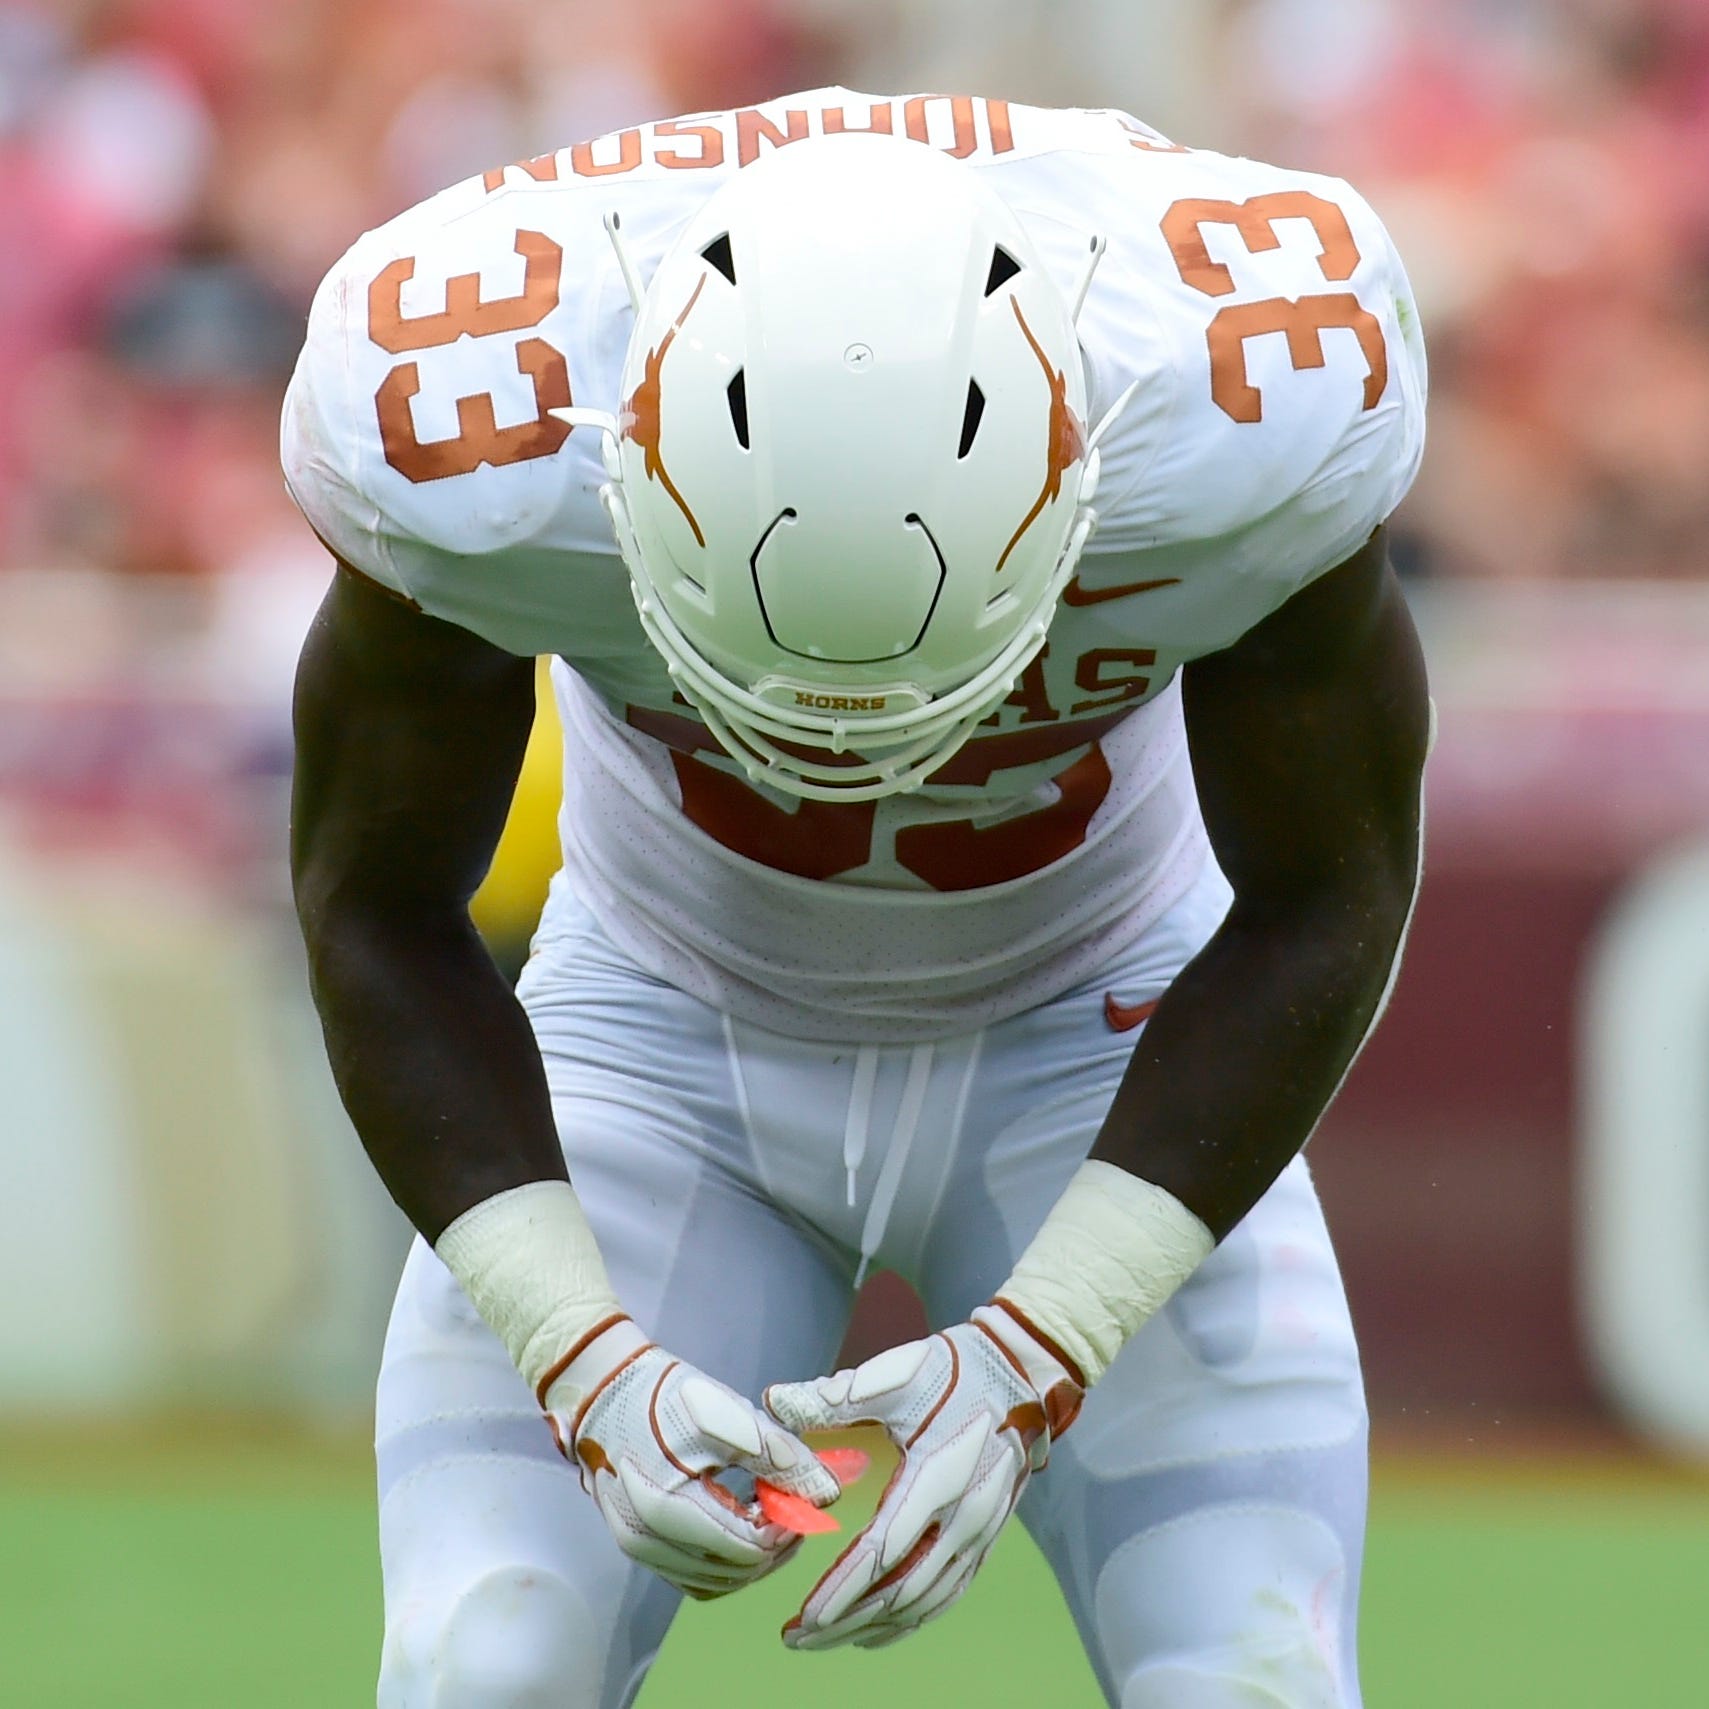 Texas linebacker Gary Johnson after being ejected for targeting against Maryland.